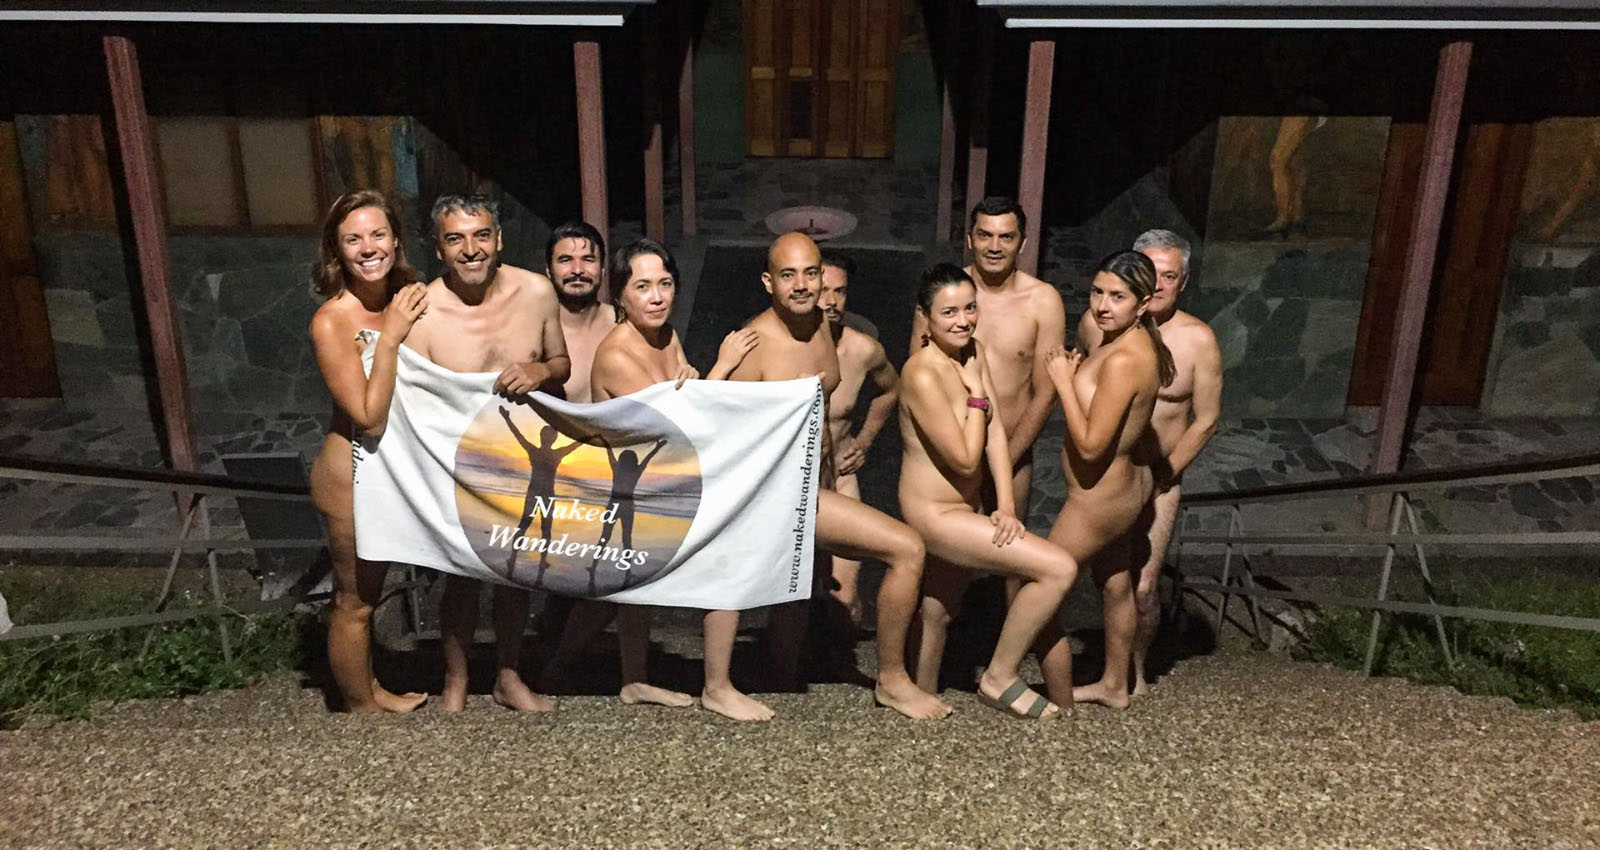 Why We've Spent the Last 4 Years Promoting Naturism